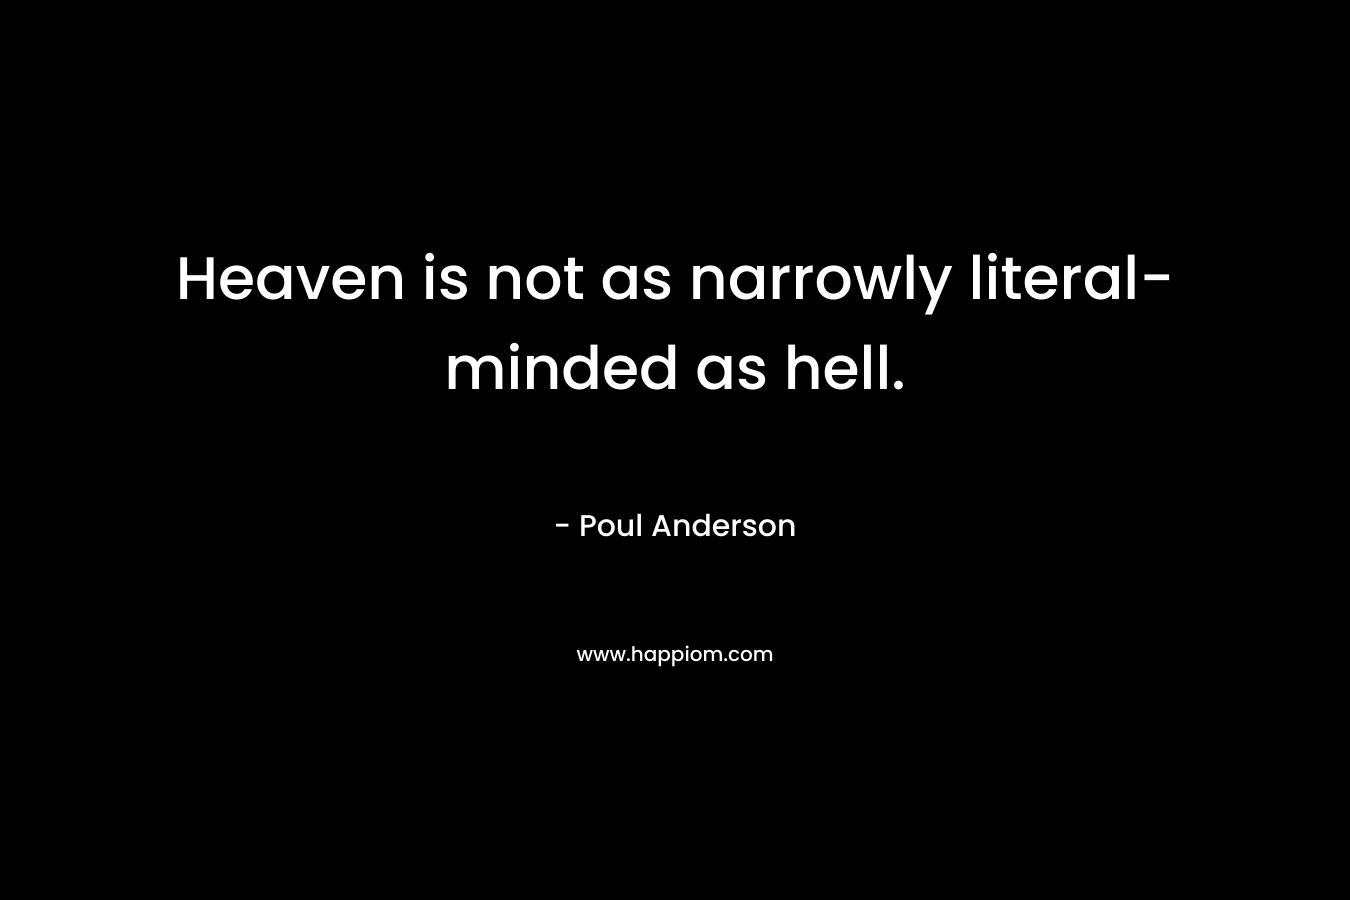 Heaven is not as narrowly literal-minded as hell.